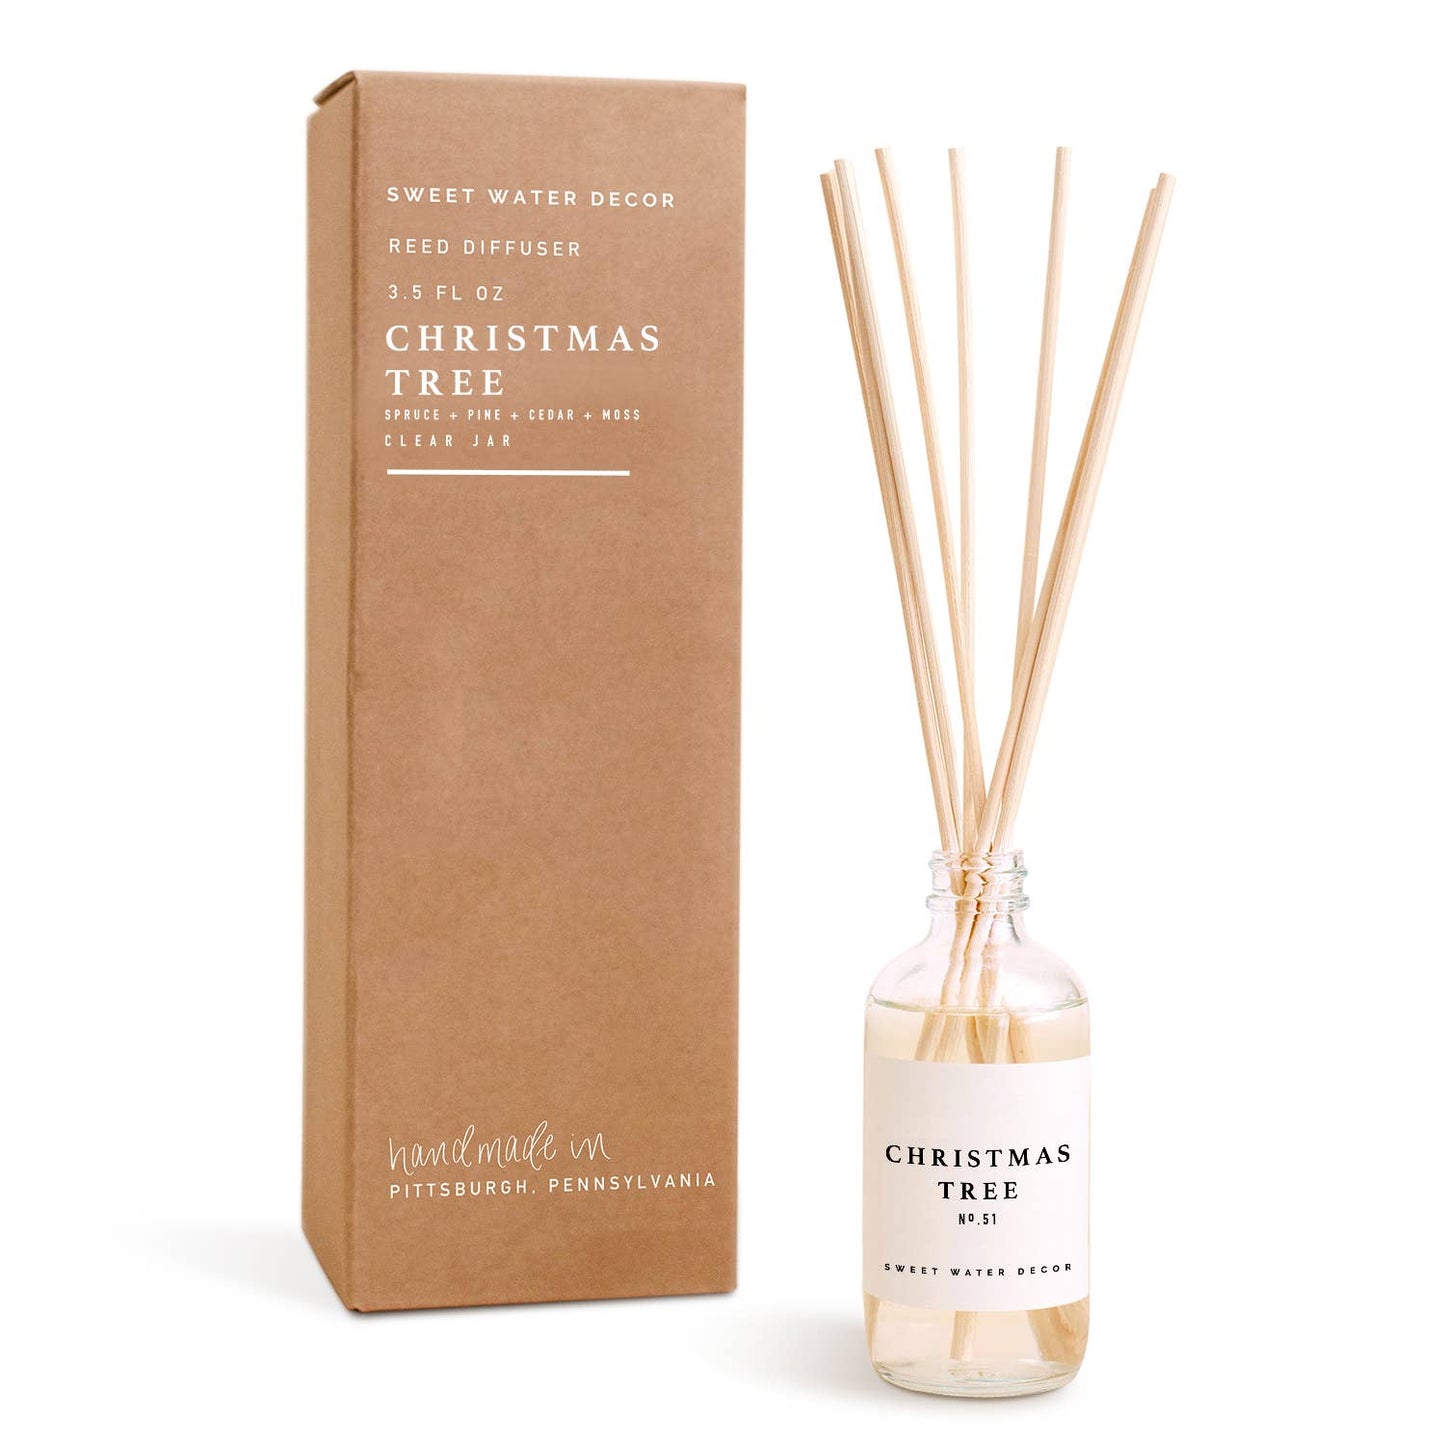 Sweet Water Decor - Christmas Tree Reed Diffuser - Clear Jar - 3.5 oz